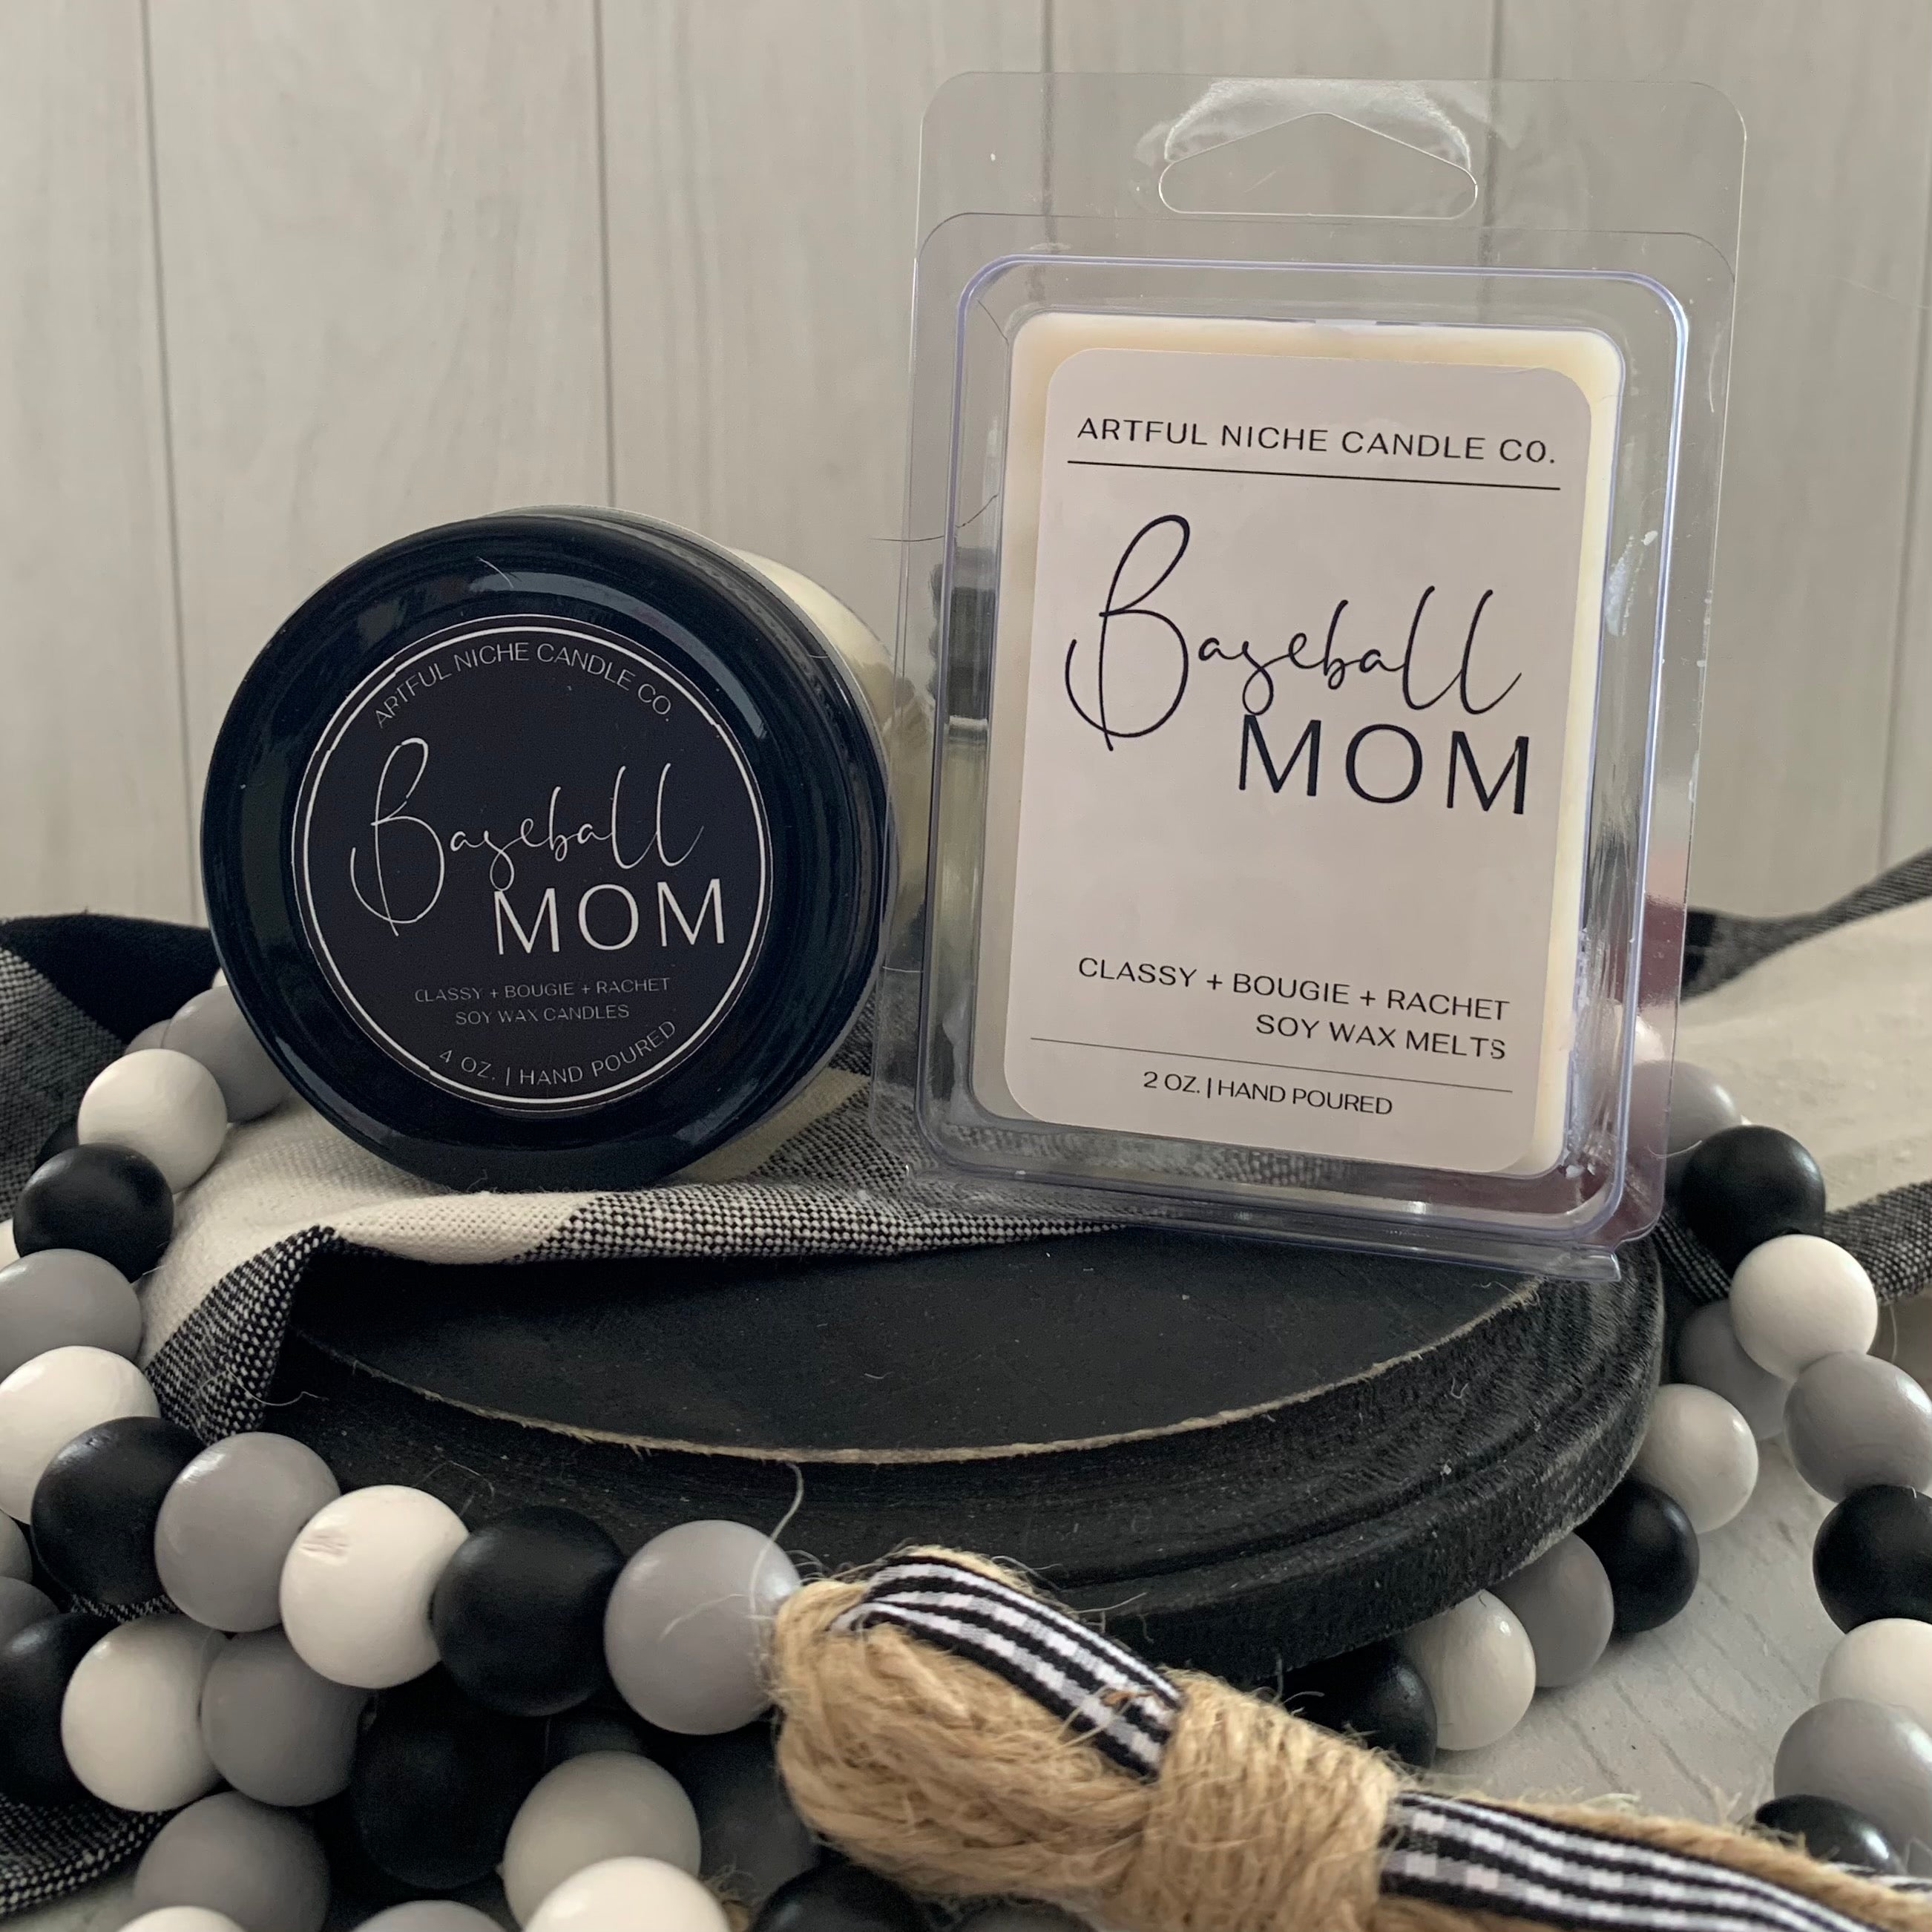 Sports Mom Themed Soy Candle Bundle: 2 - 4 oz. Candles